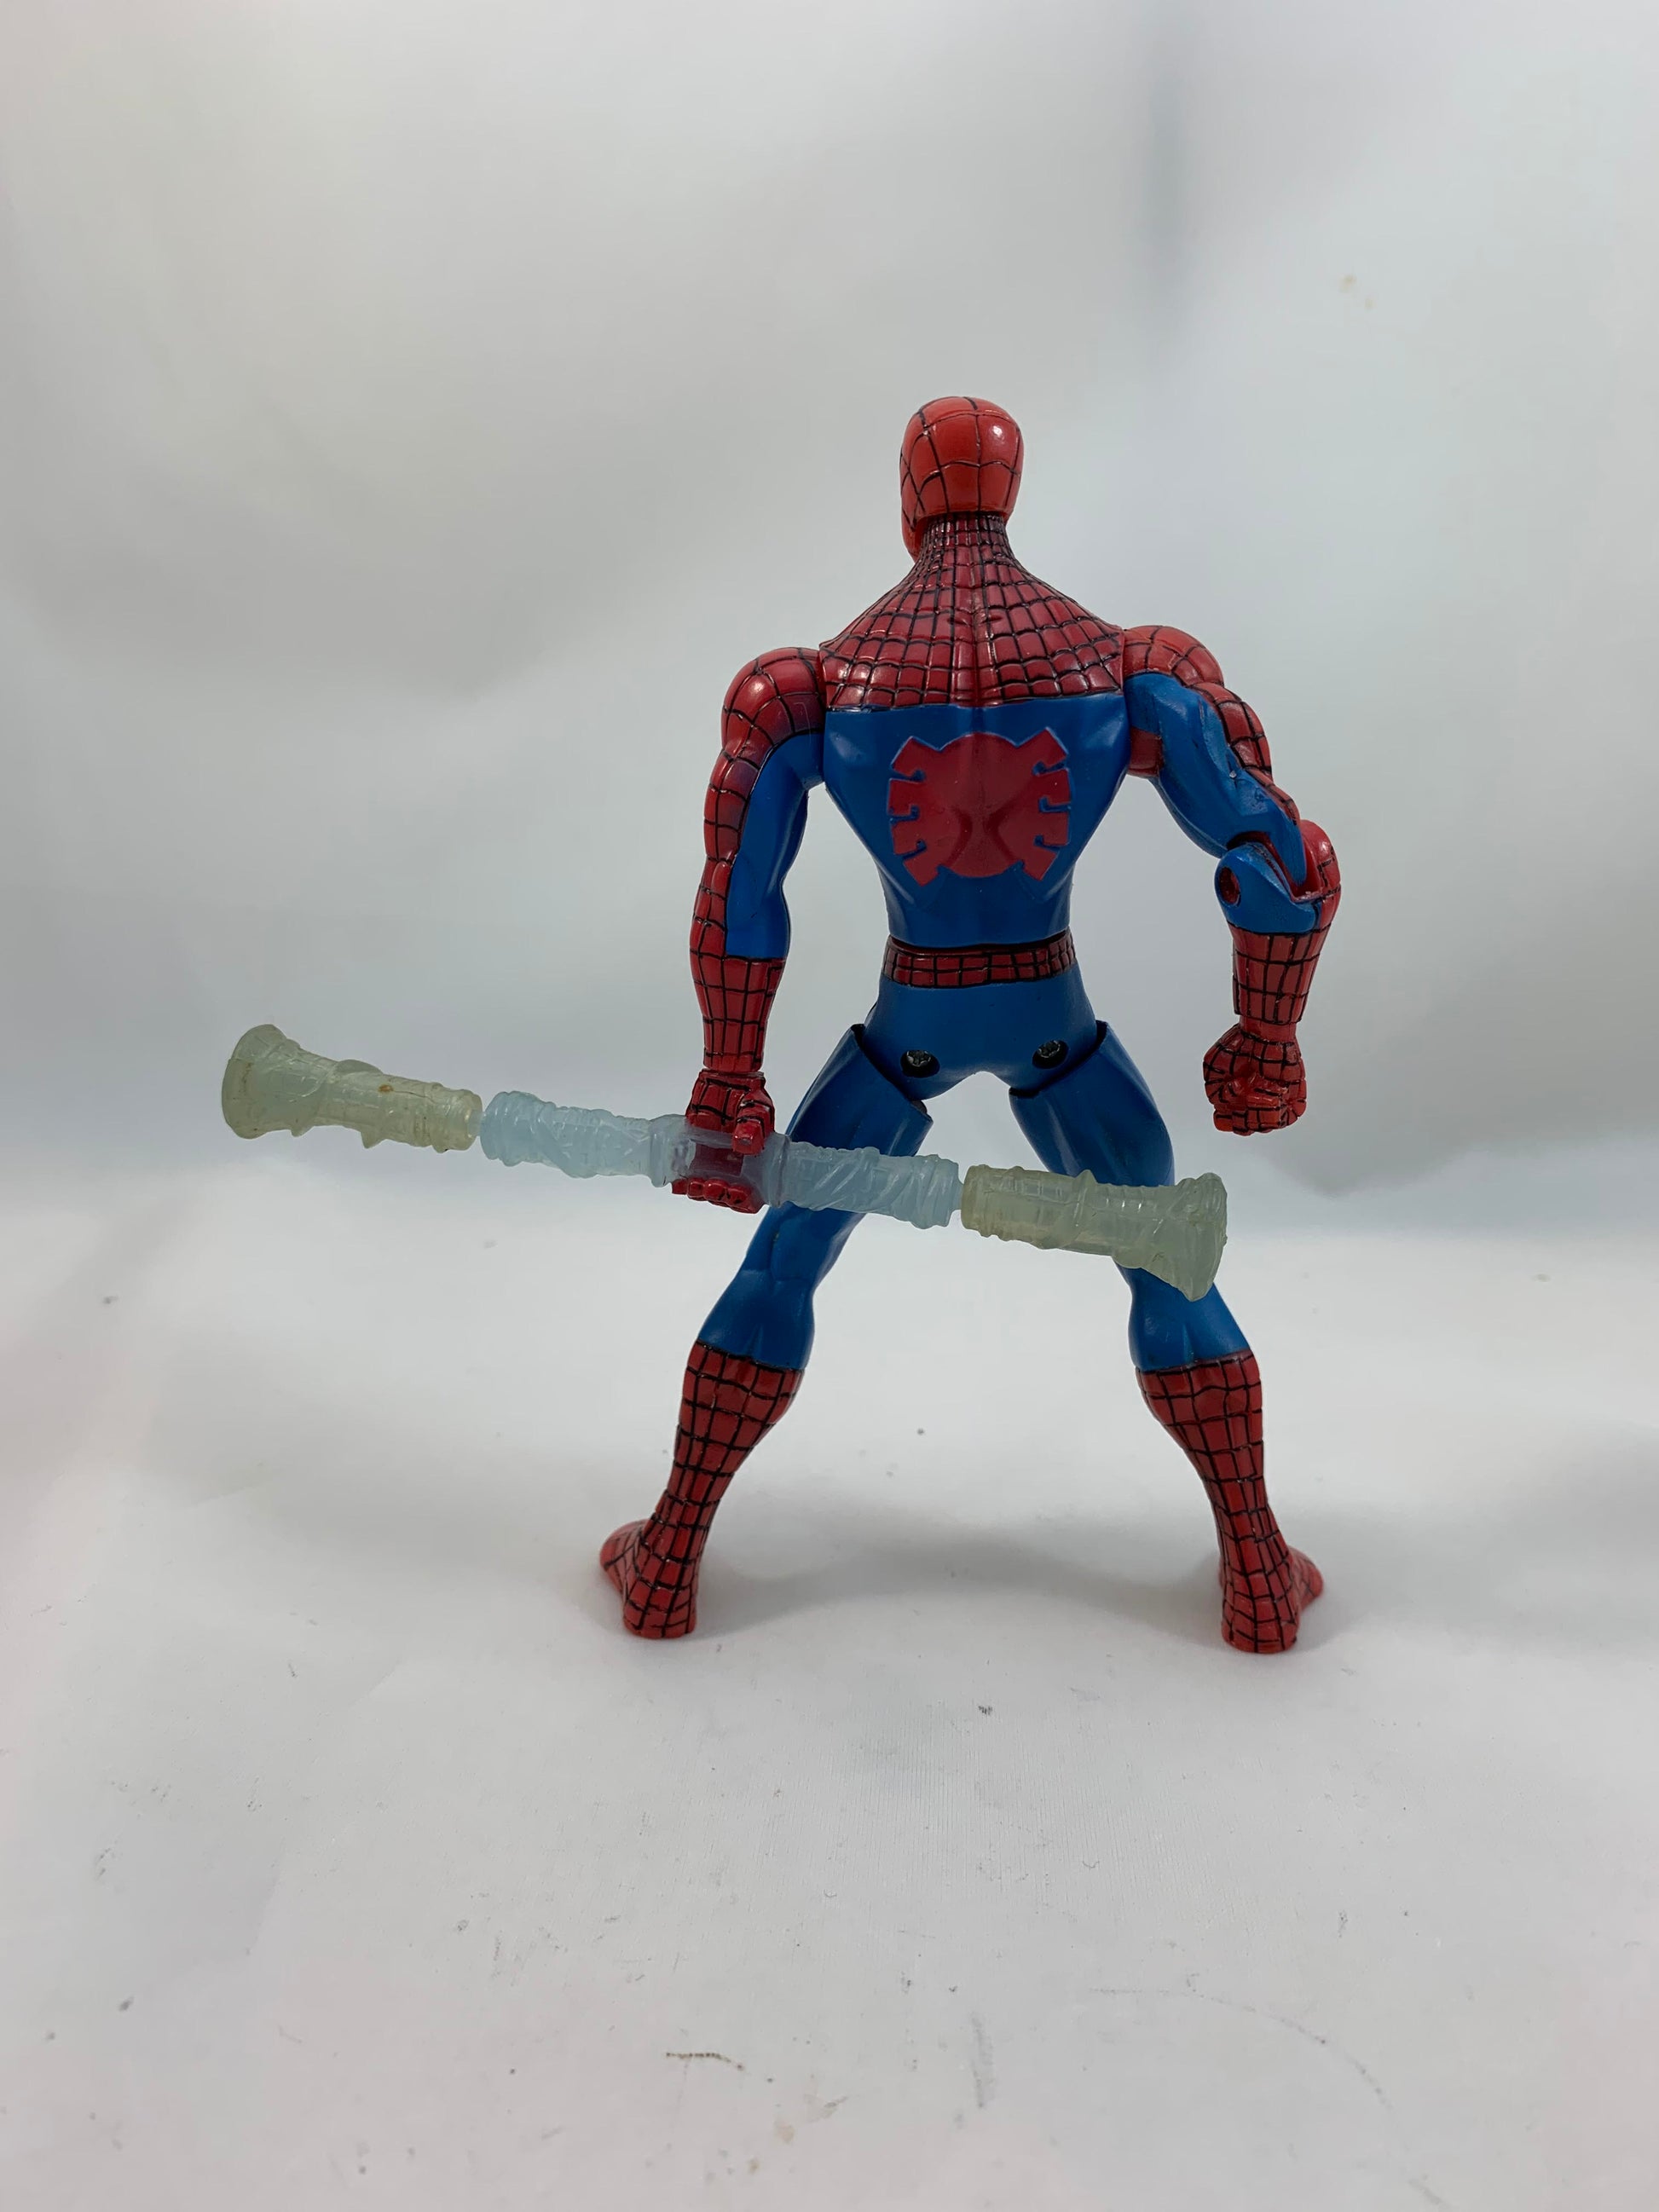 HASBRO MARVEL SPIDERMAN WEB BATTLERS 2010 with spinning weapon. - Loose